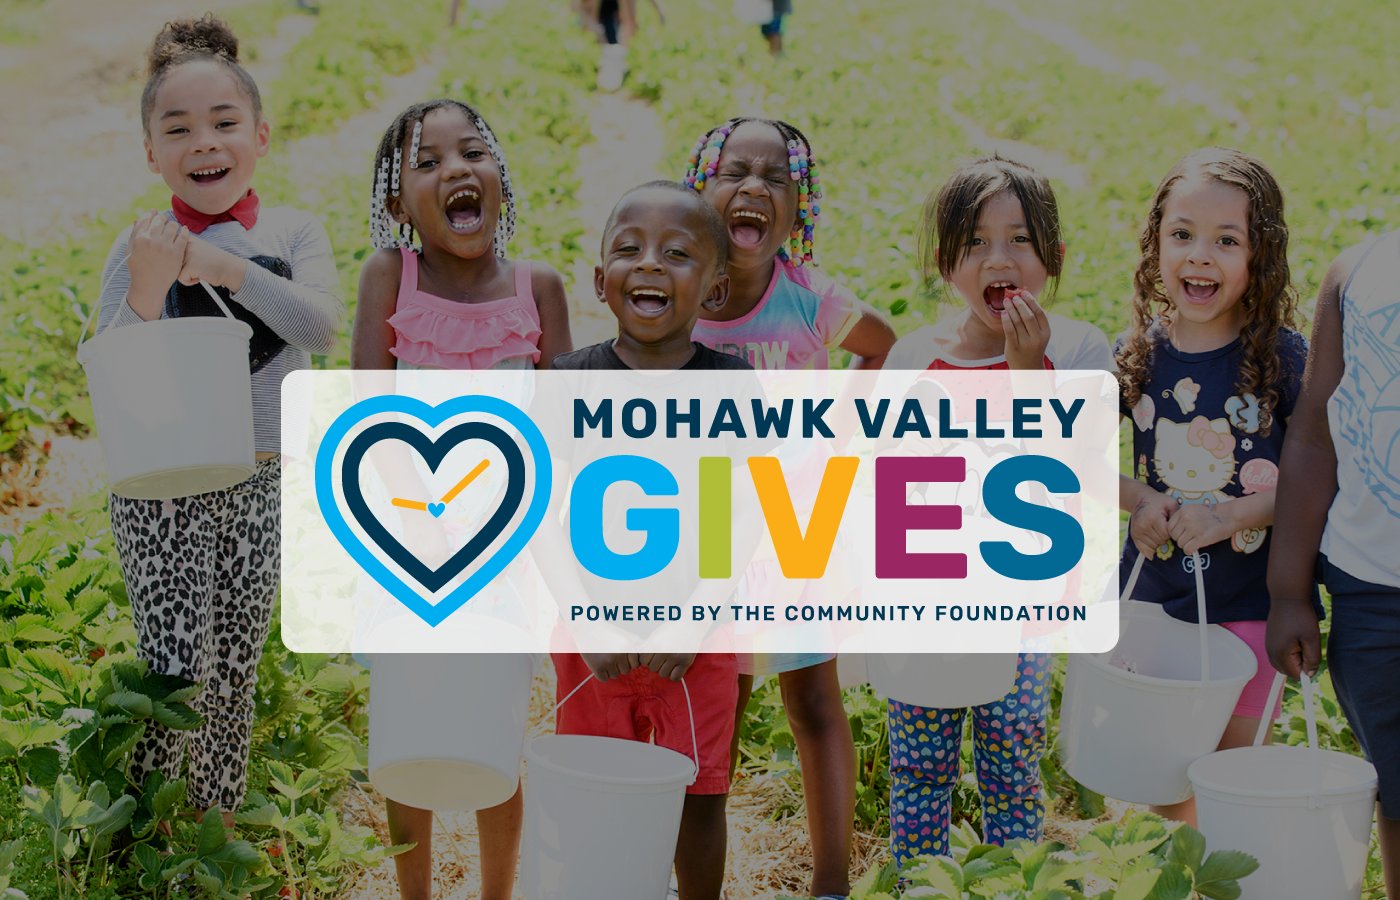 The Community Foundation of Herkimer and Oneida Counties has established the first giving day in the Mohawk Valley, titled Mohawk Valley Gives. On Tuesday, Sept. 20, from midnight to 11:59 p.m., donors will be able to choose from over 150 local nonprofit organizations to allocate funds to.